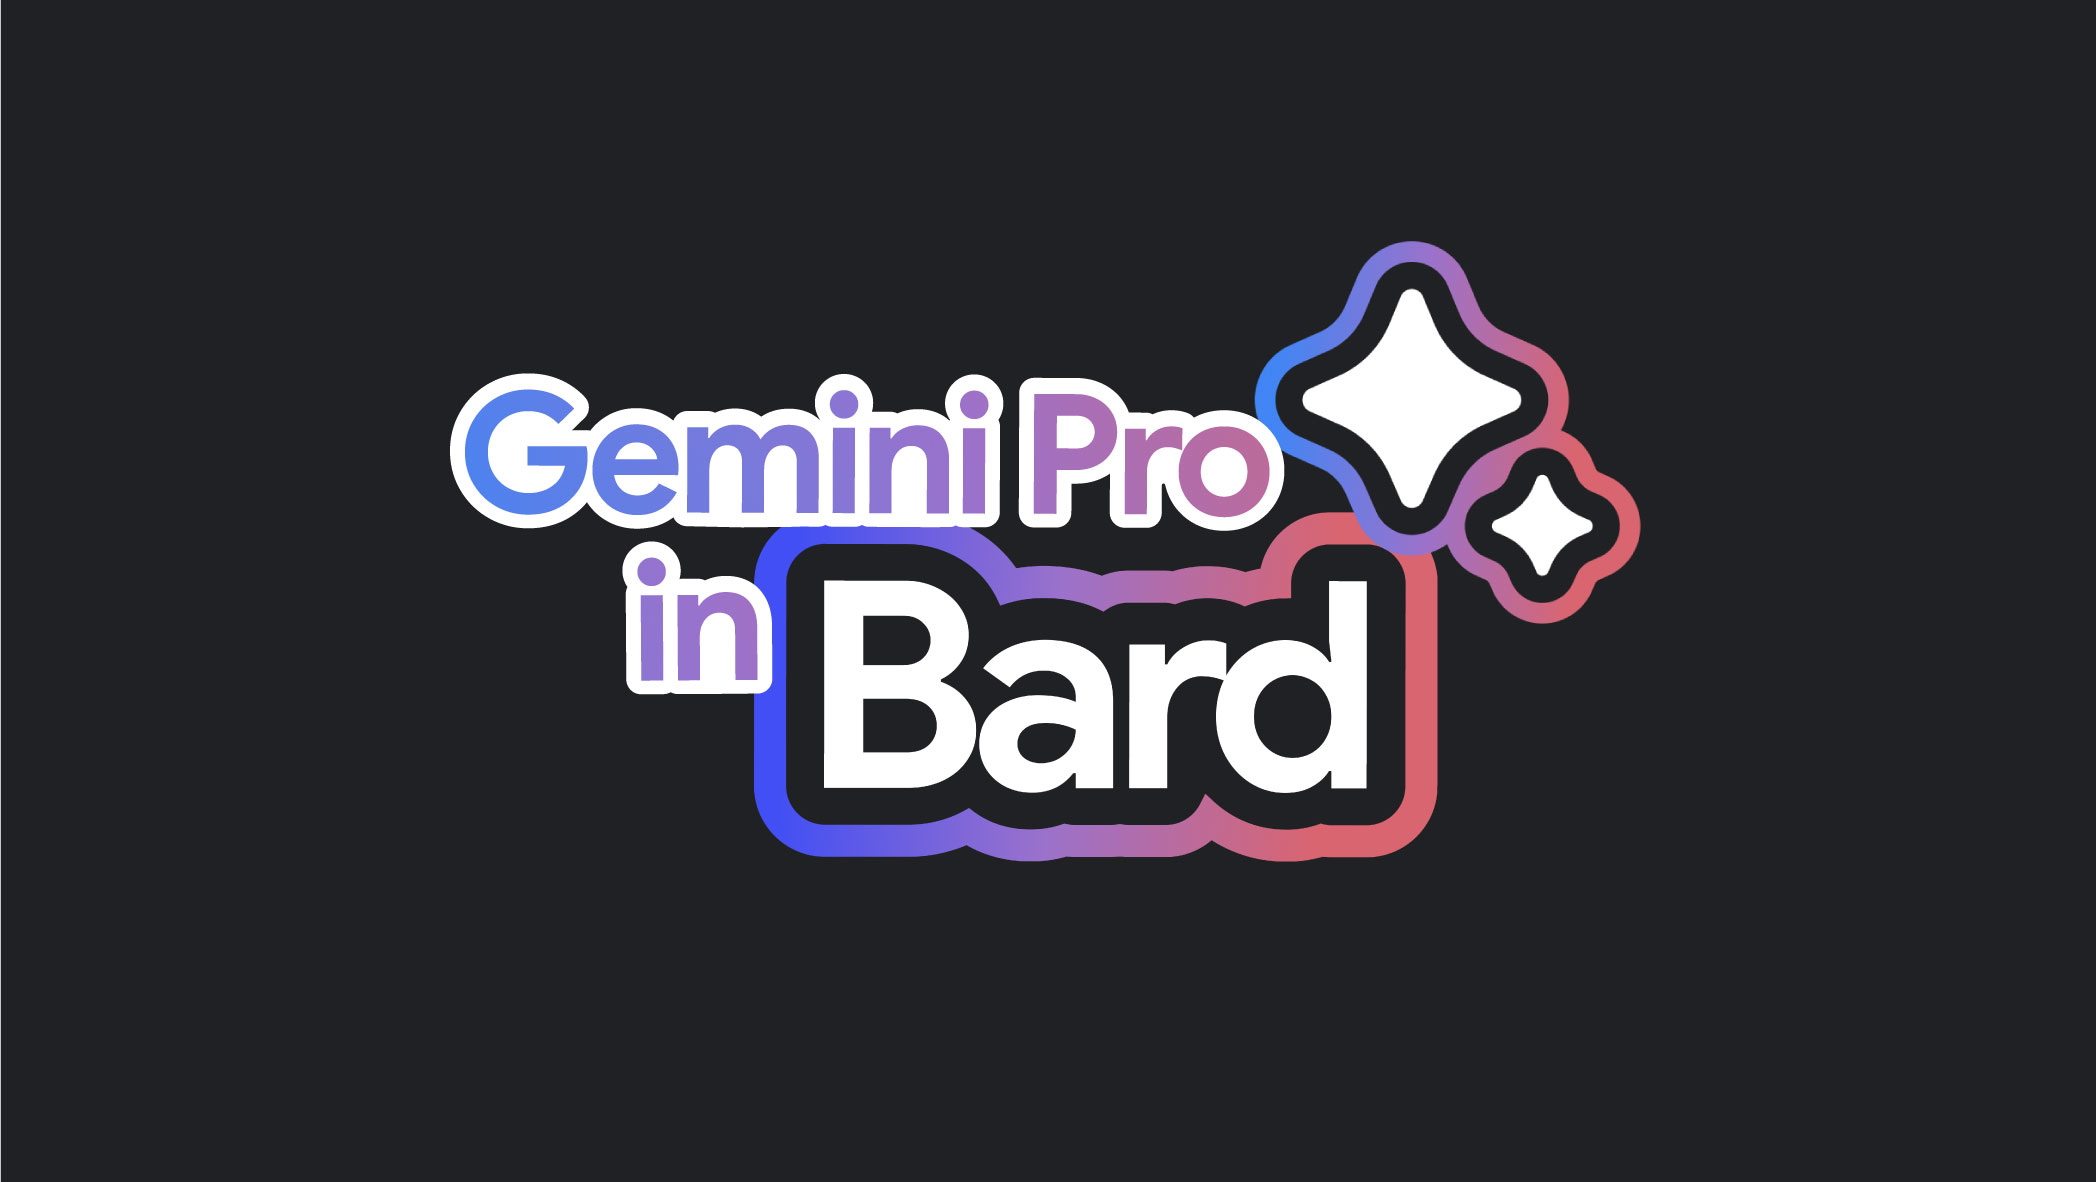 Cool becomes more powerful.  Gemini Pro arrives in Italy, here's what changes